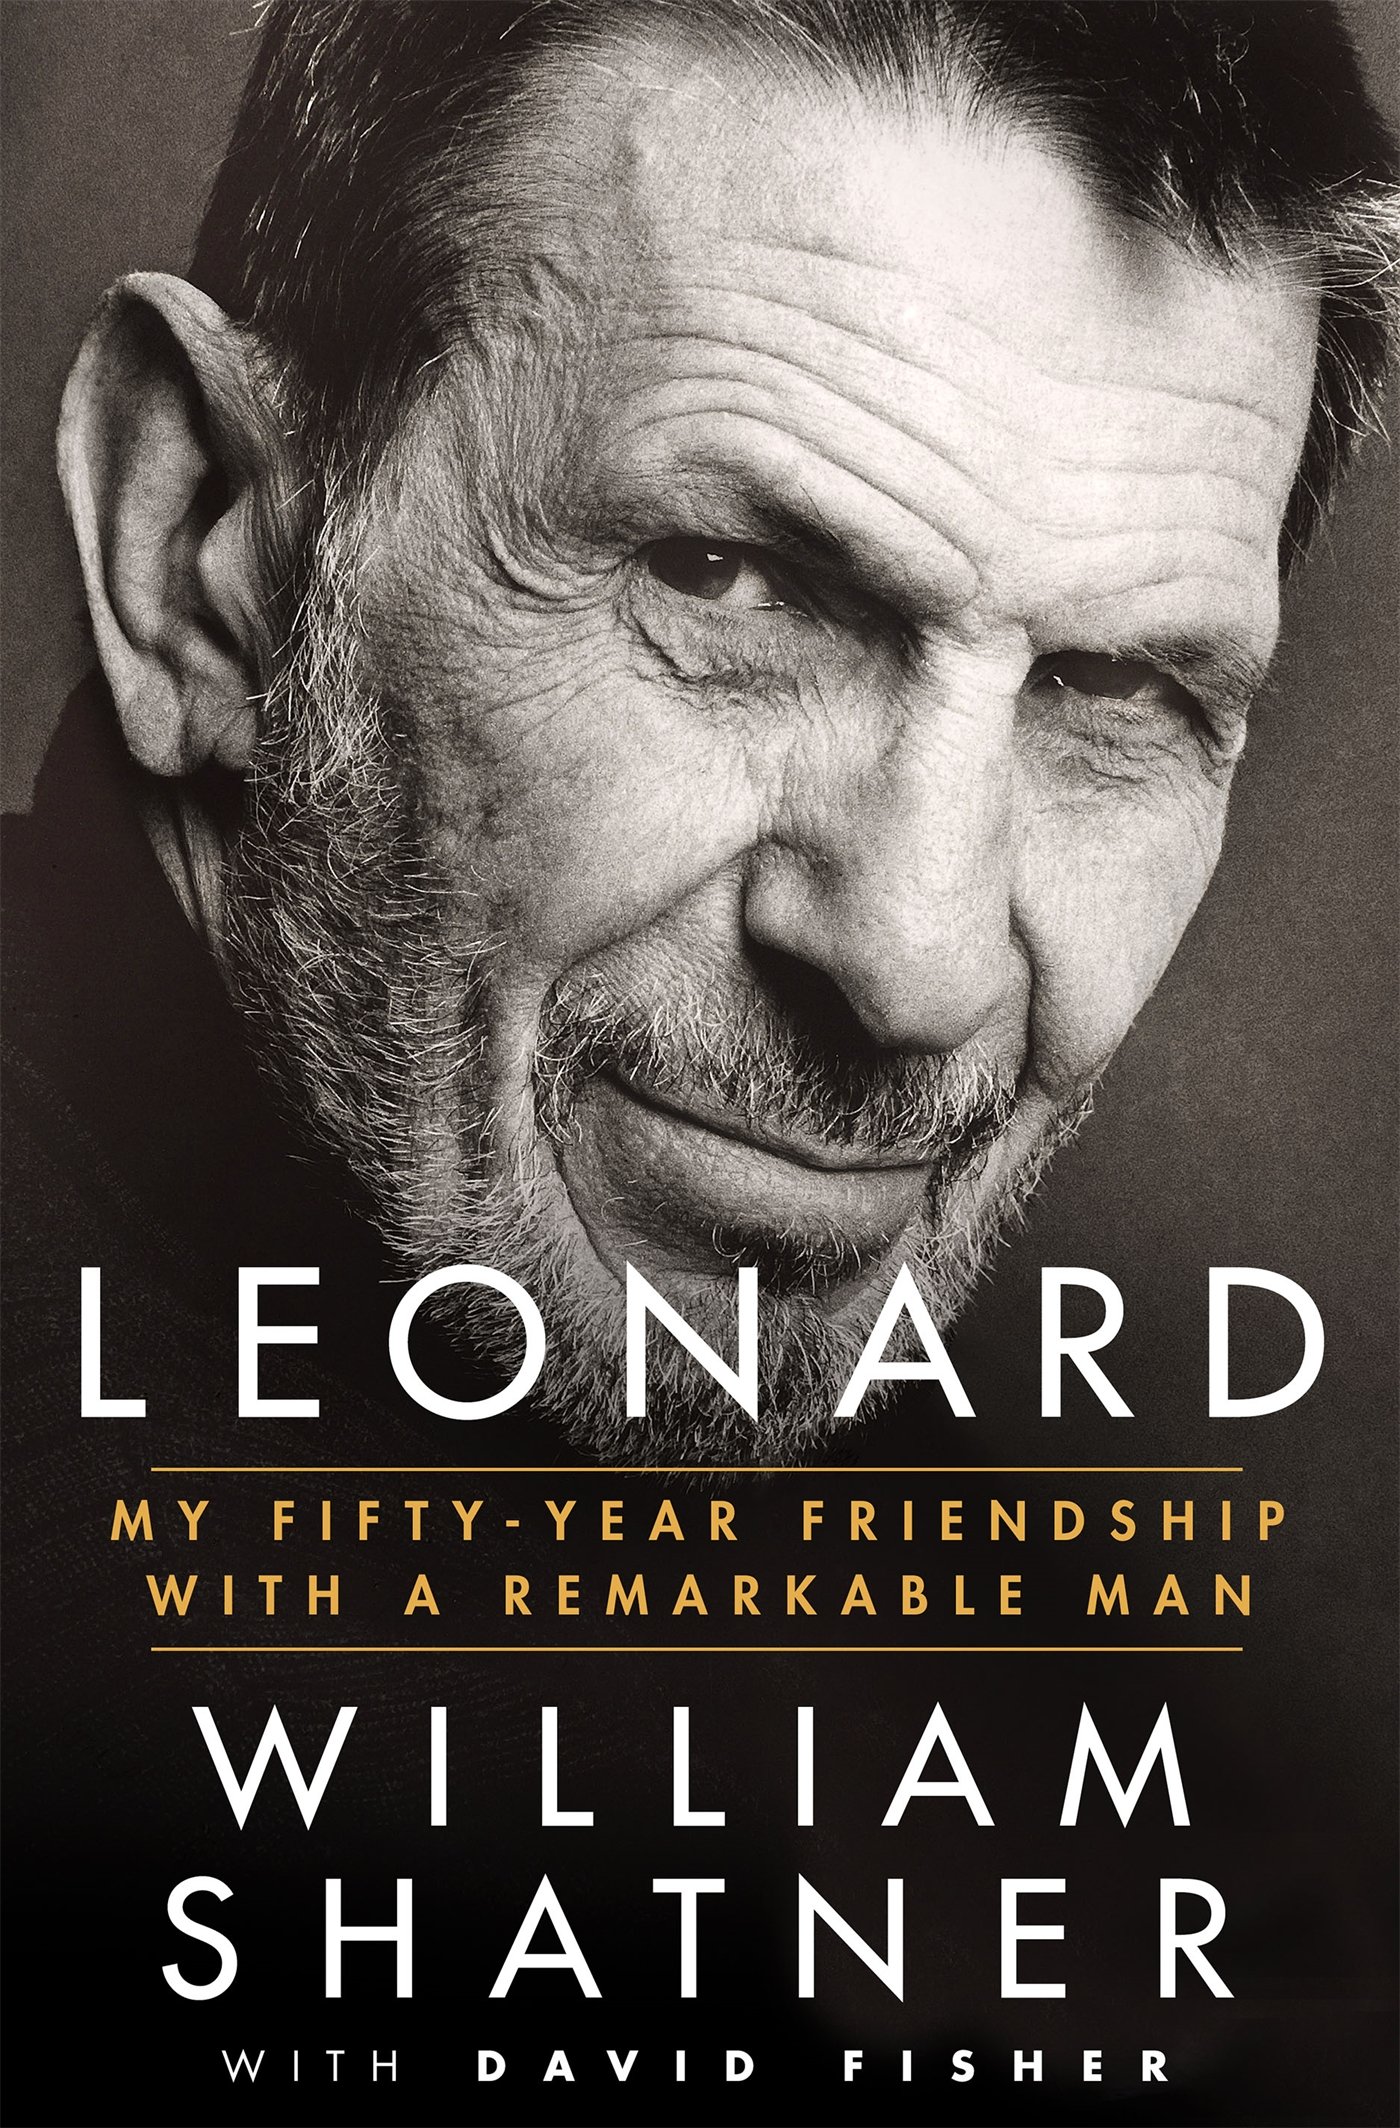 “Leonard: My Fifty-Year Friendship with a Remarkable Man” Review by Themindreels.com